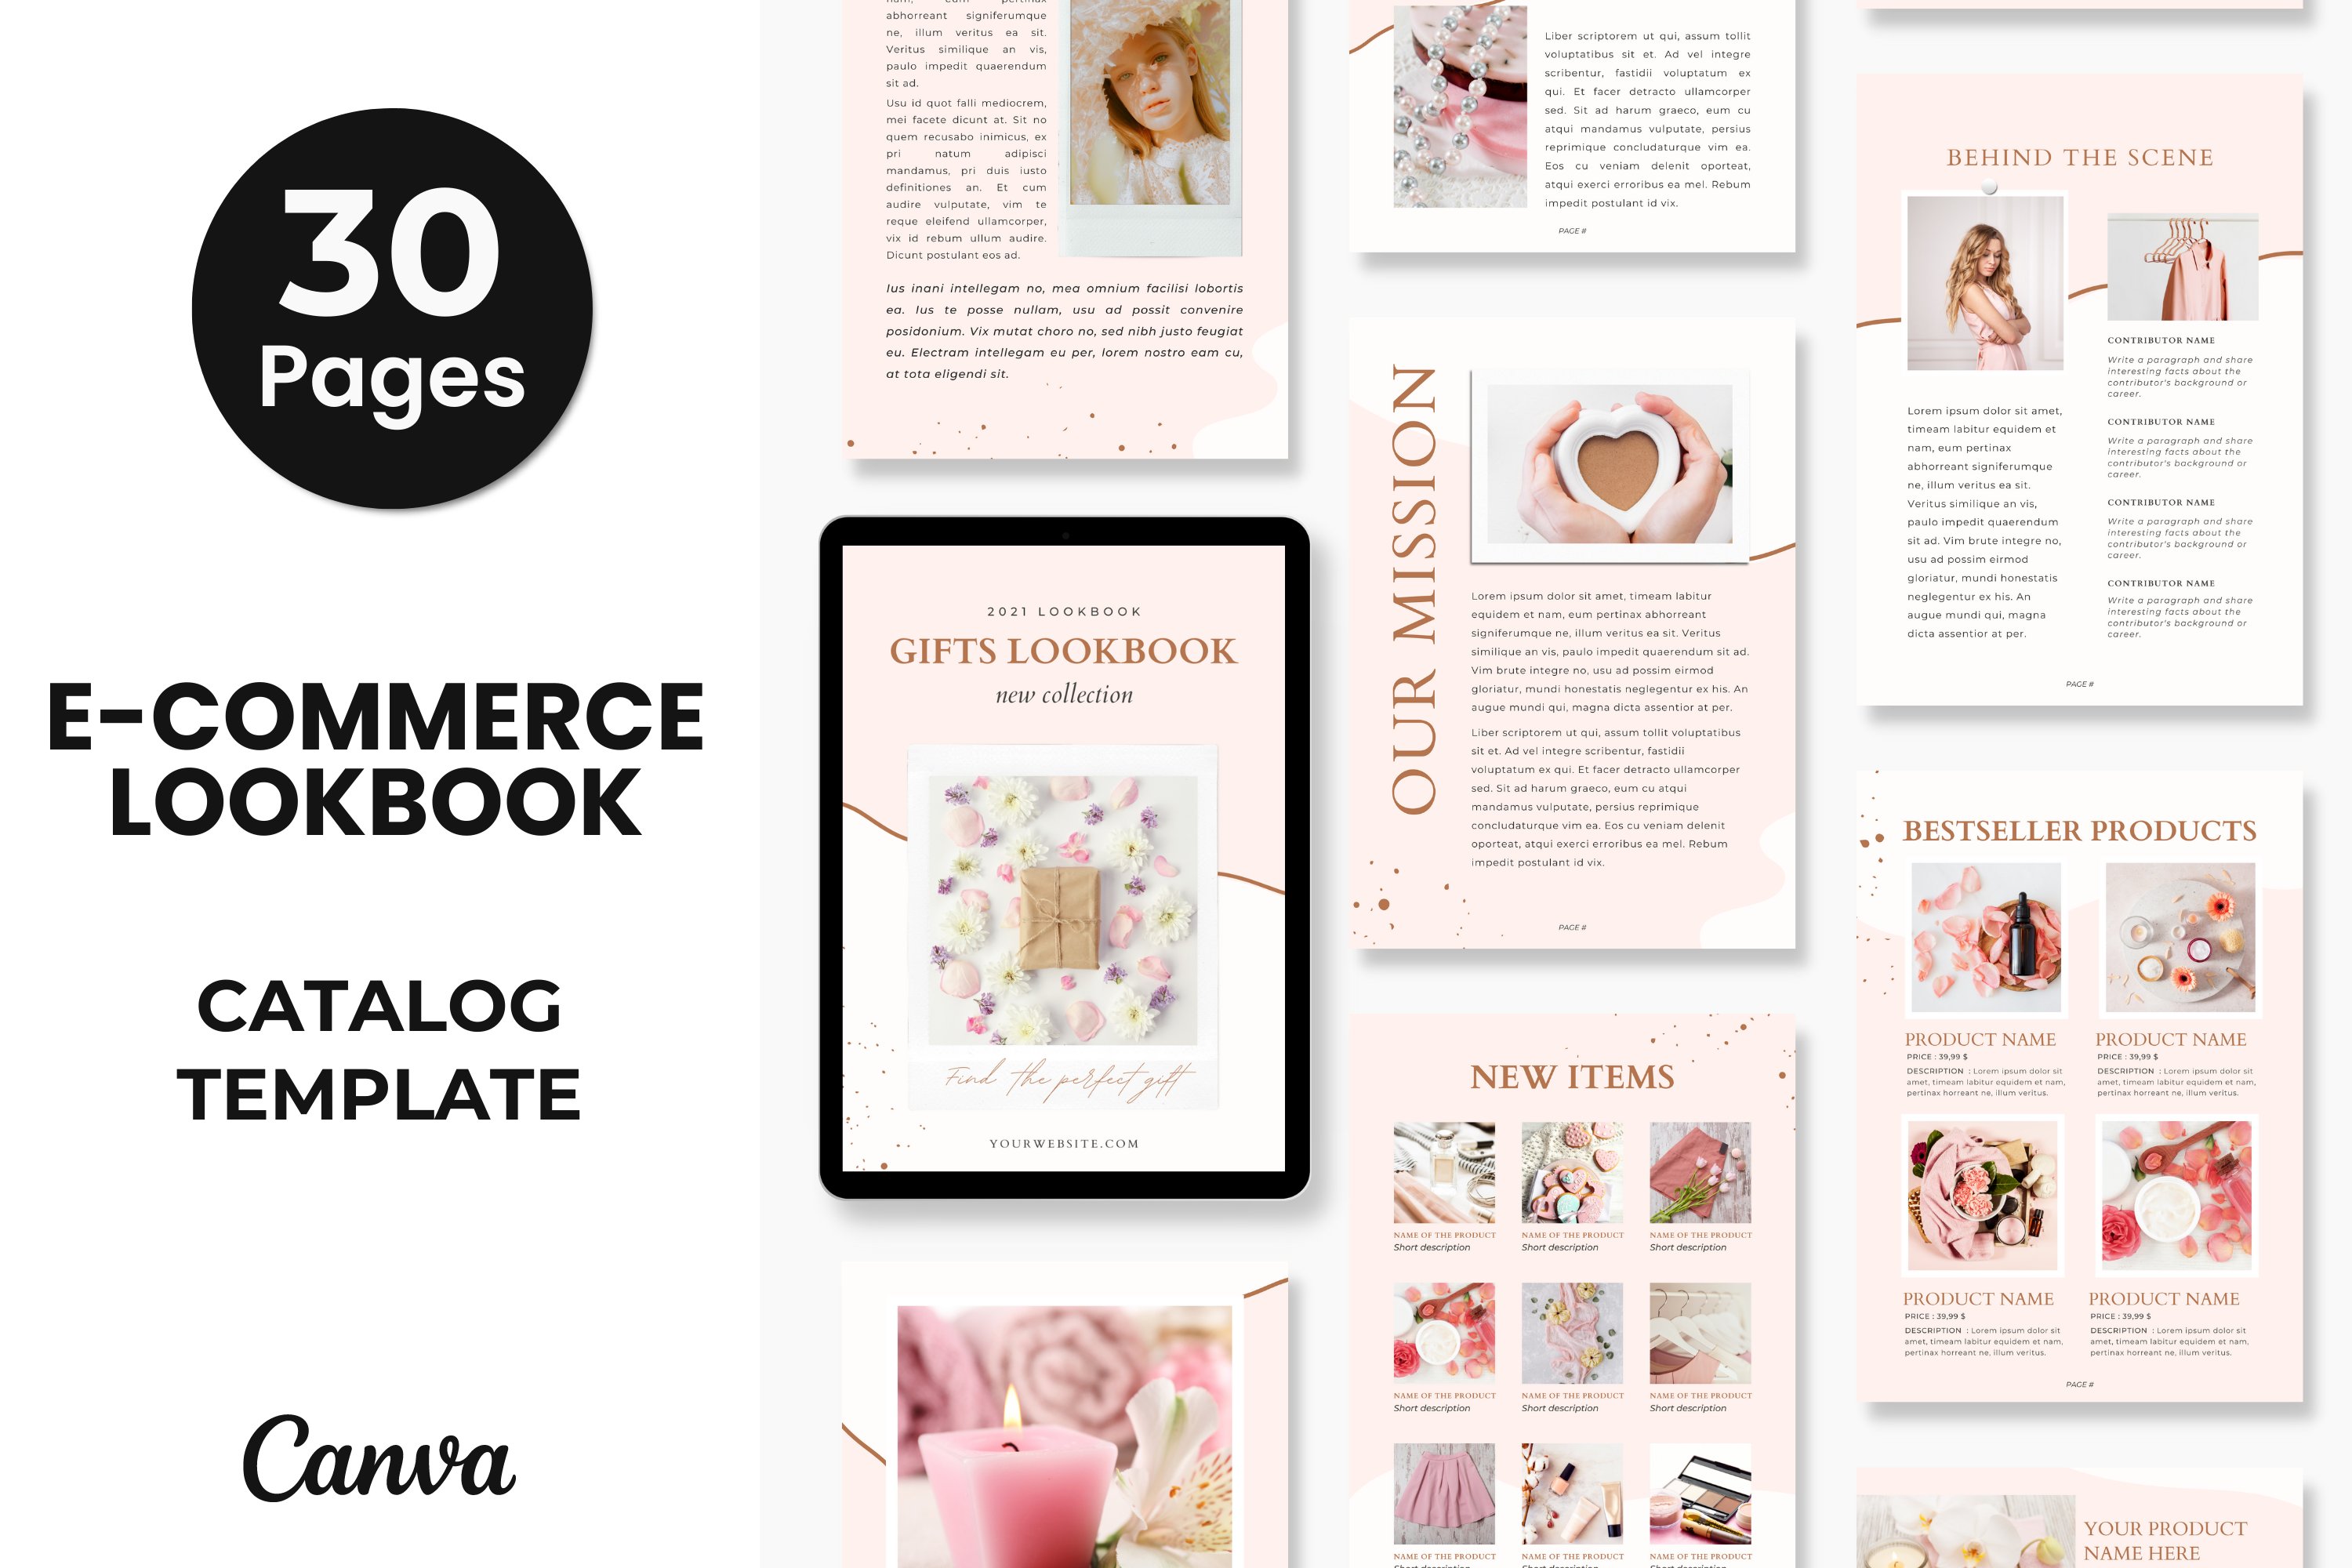 Product Catalog Template Canva Pink cover image.